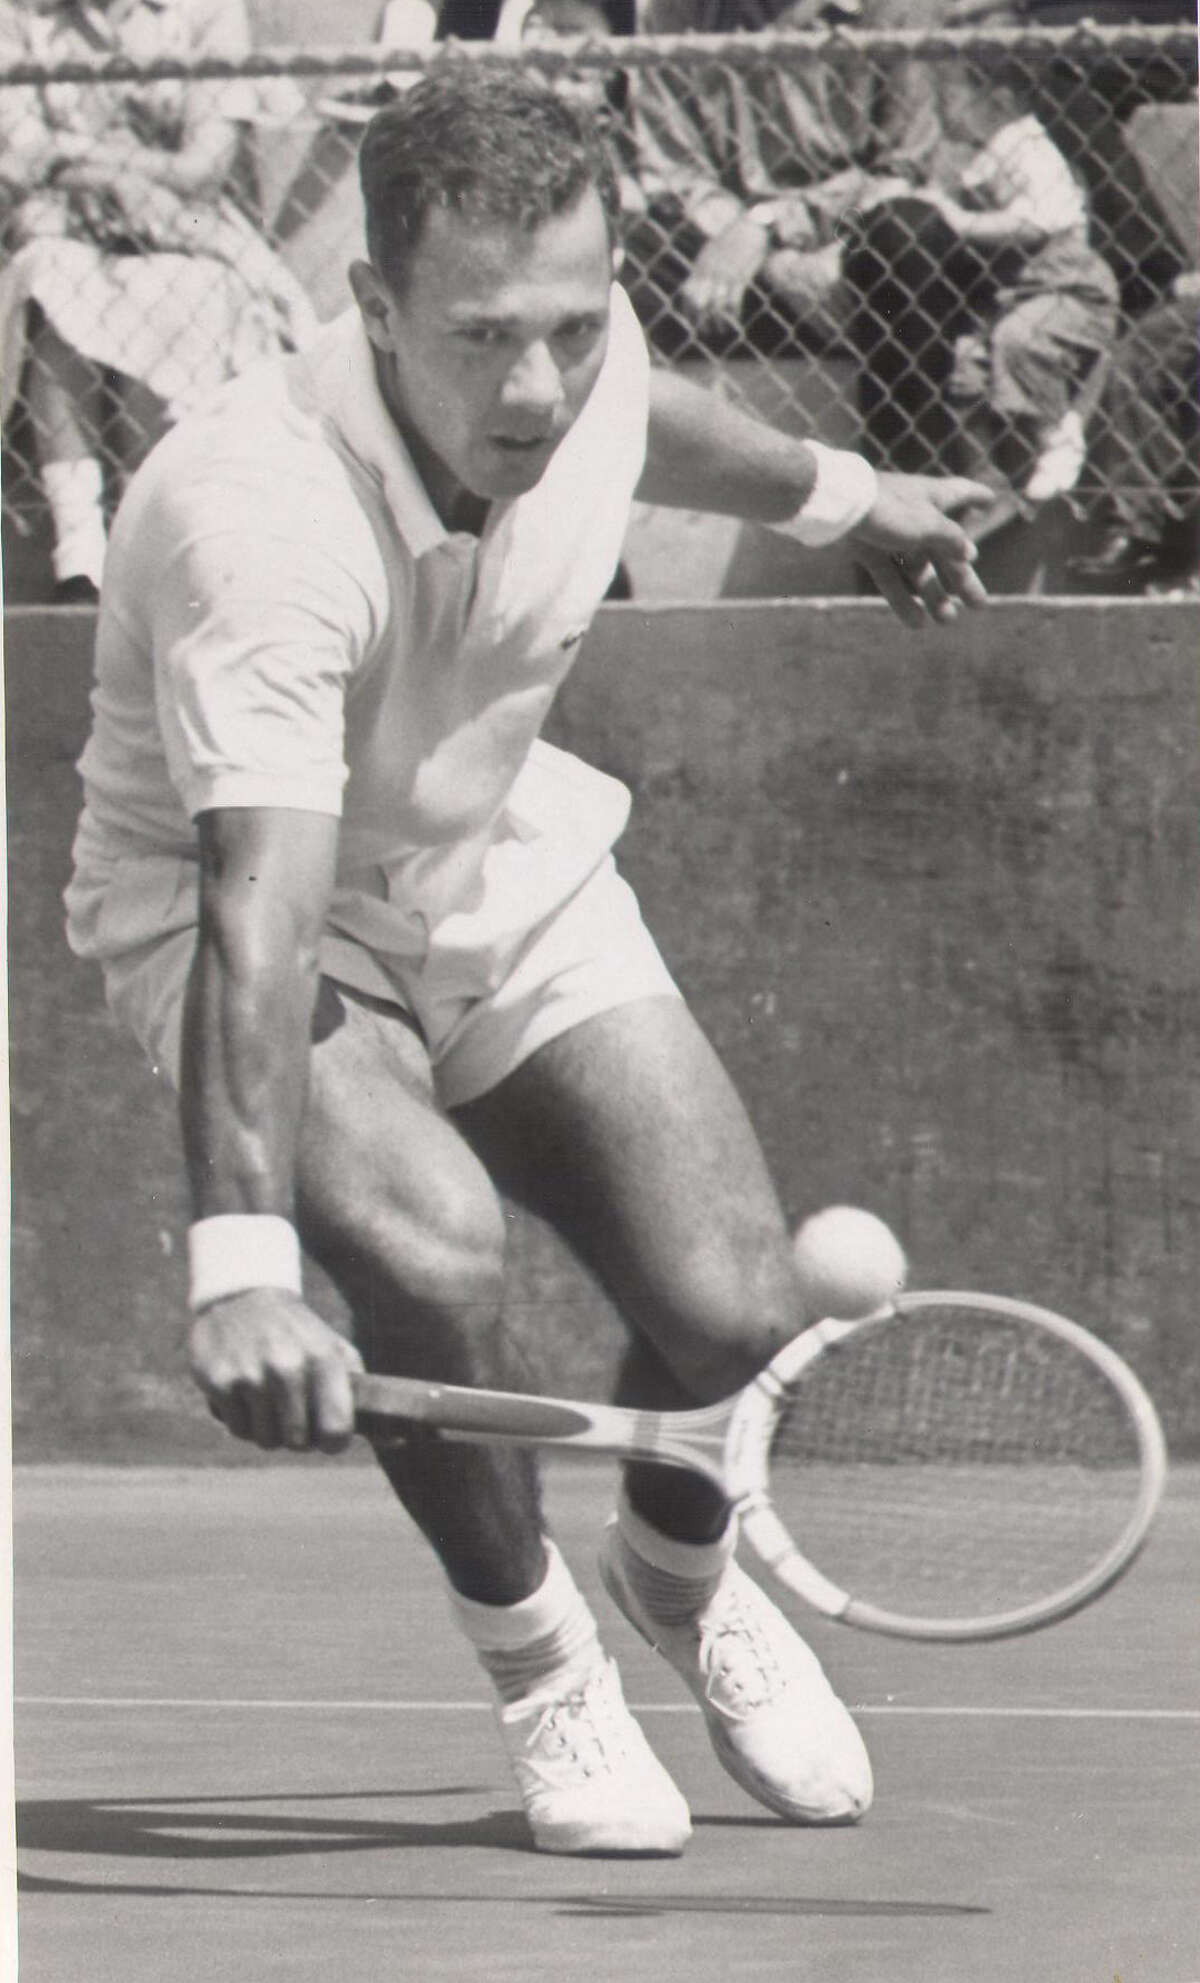 Chuck McKinley returns a shot in a 1962 match vs. Neal Marcus from Rice University.